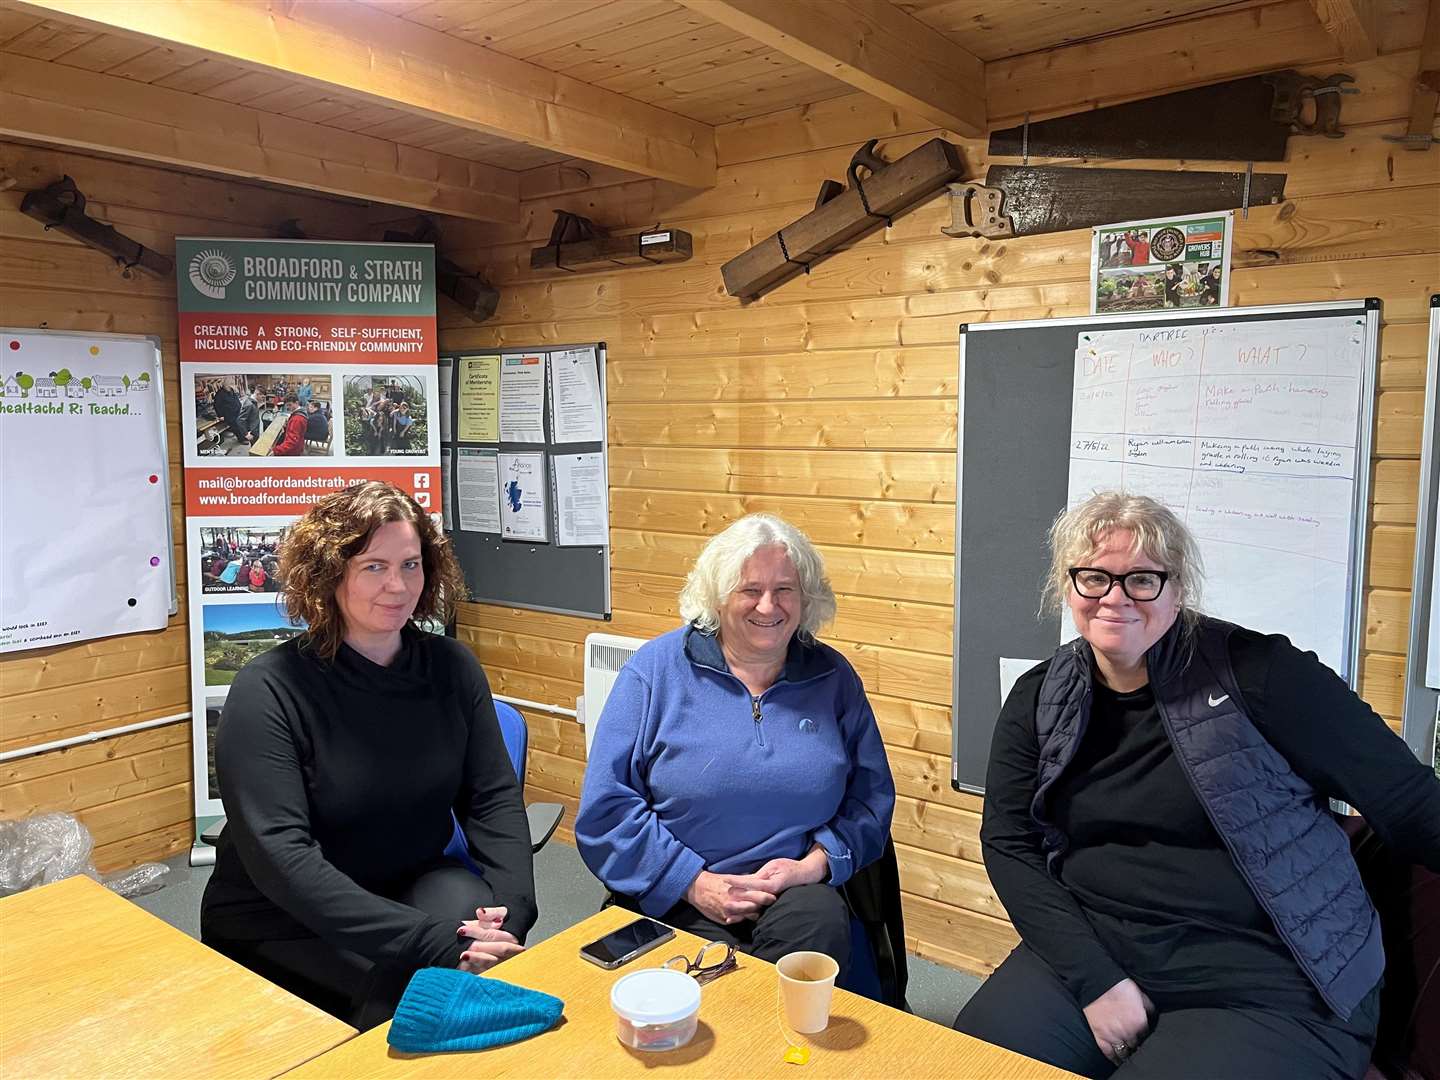 From left to right: Norma Morrison and Shirley Grant, of Broadford & Strath Community Company, with hub project manager Joan Lawrie.